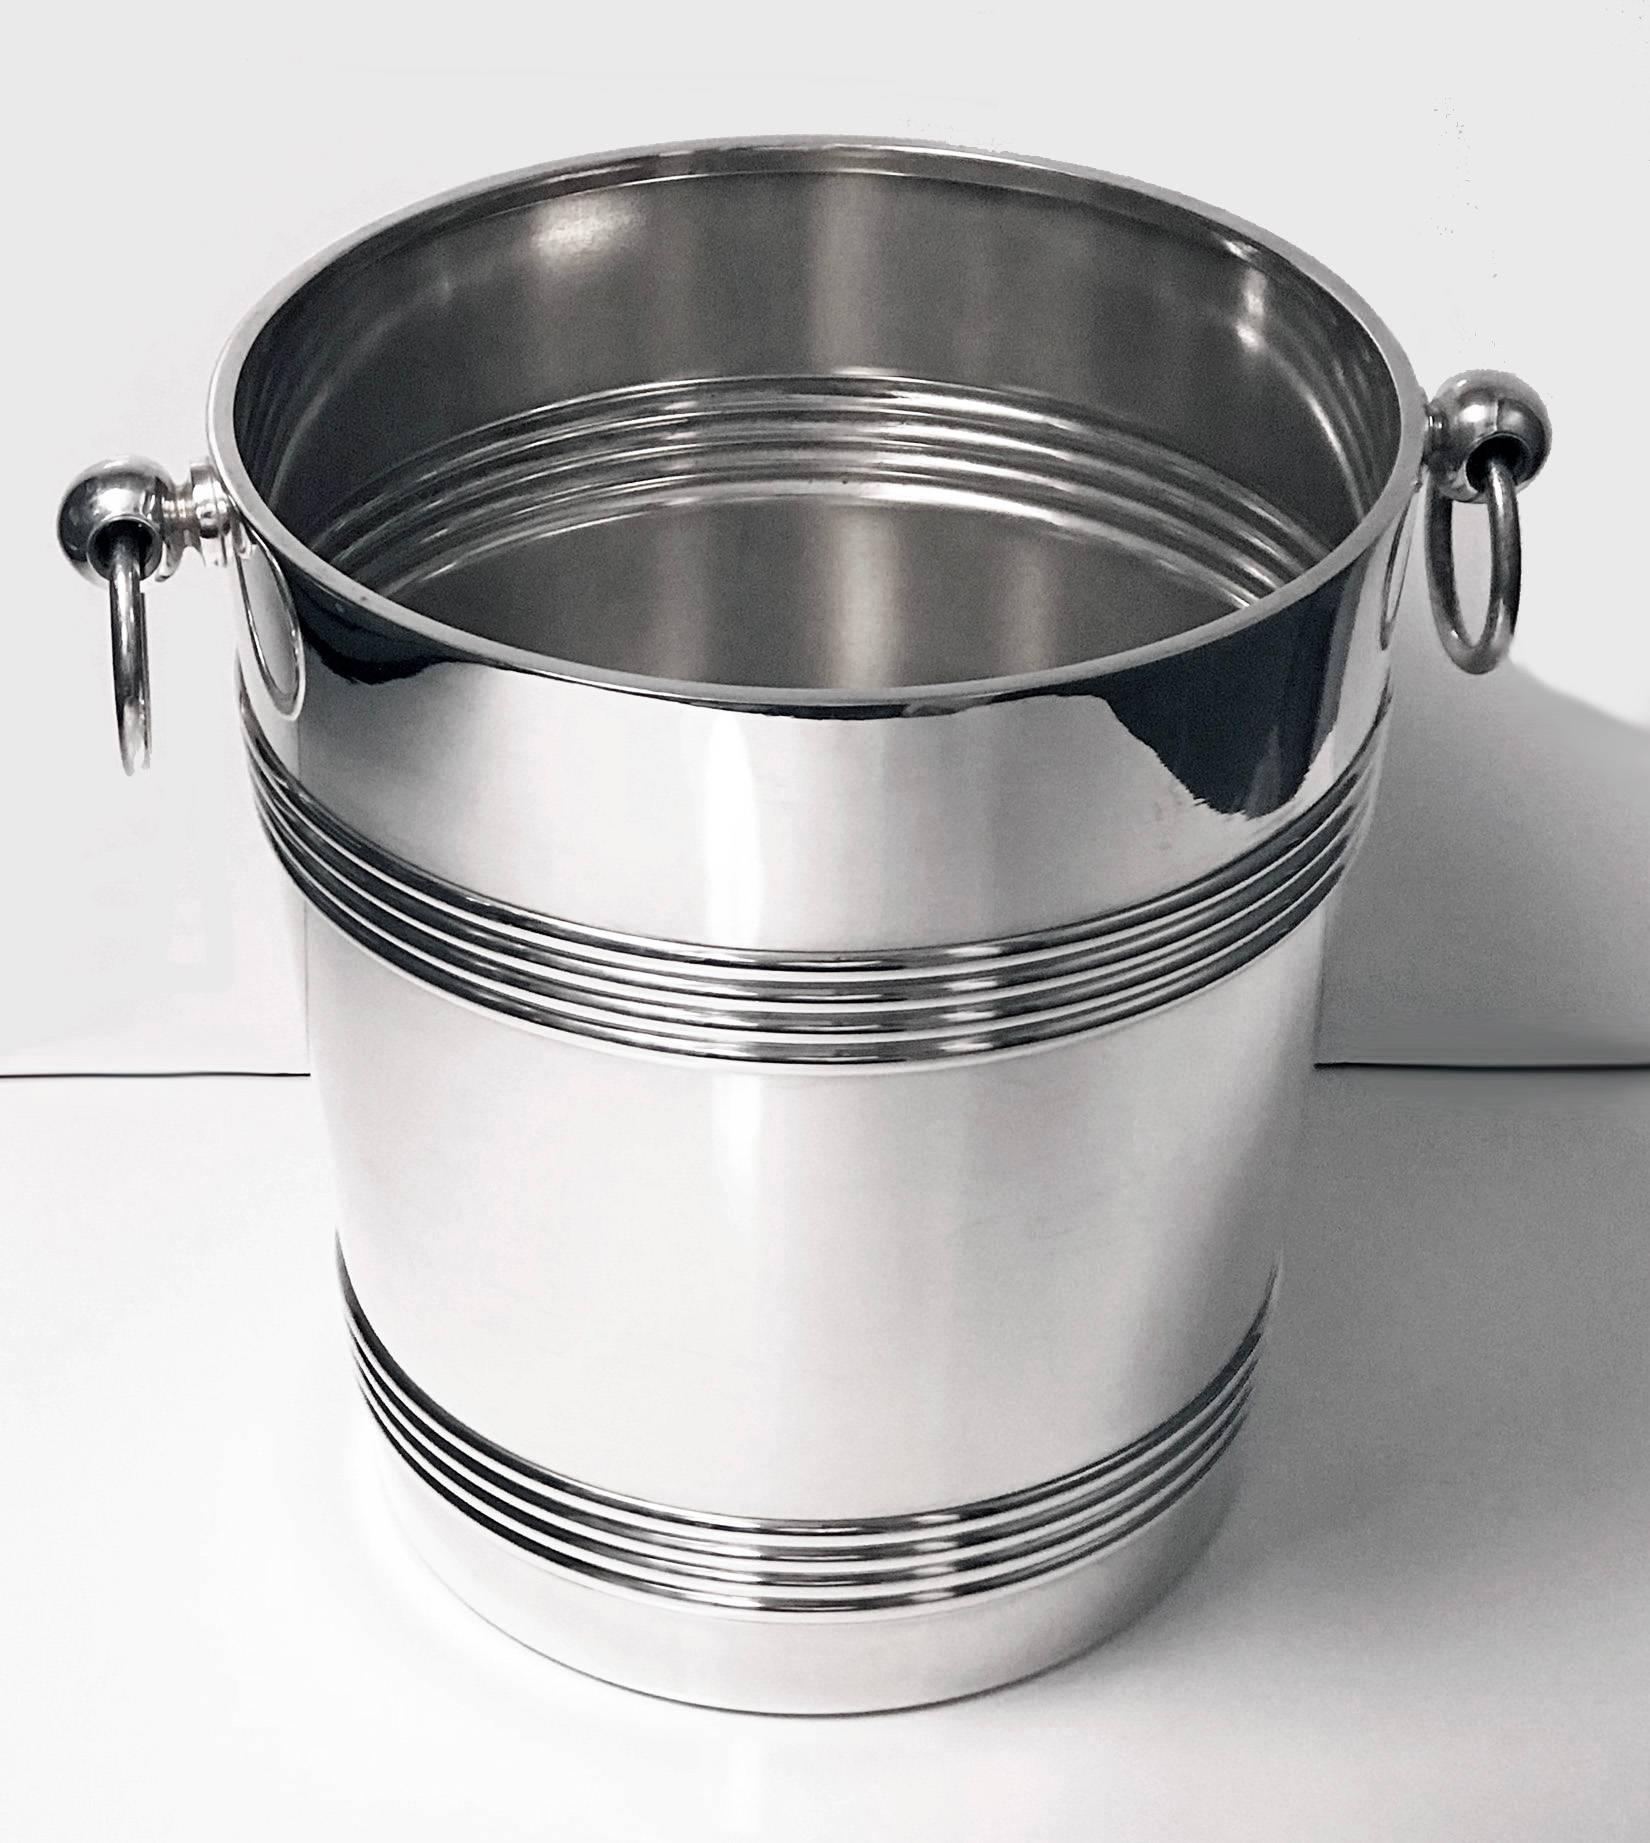 Art Deco Christofle silver plate cooler, France, circa 1935. The cooler of large very slightly tapered form, plain with upper and lower reeded band surround, ring loop handles. Marked with Christofle marks on base. Measures: Height 8 .25 inches.